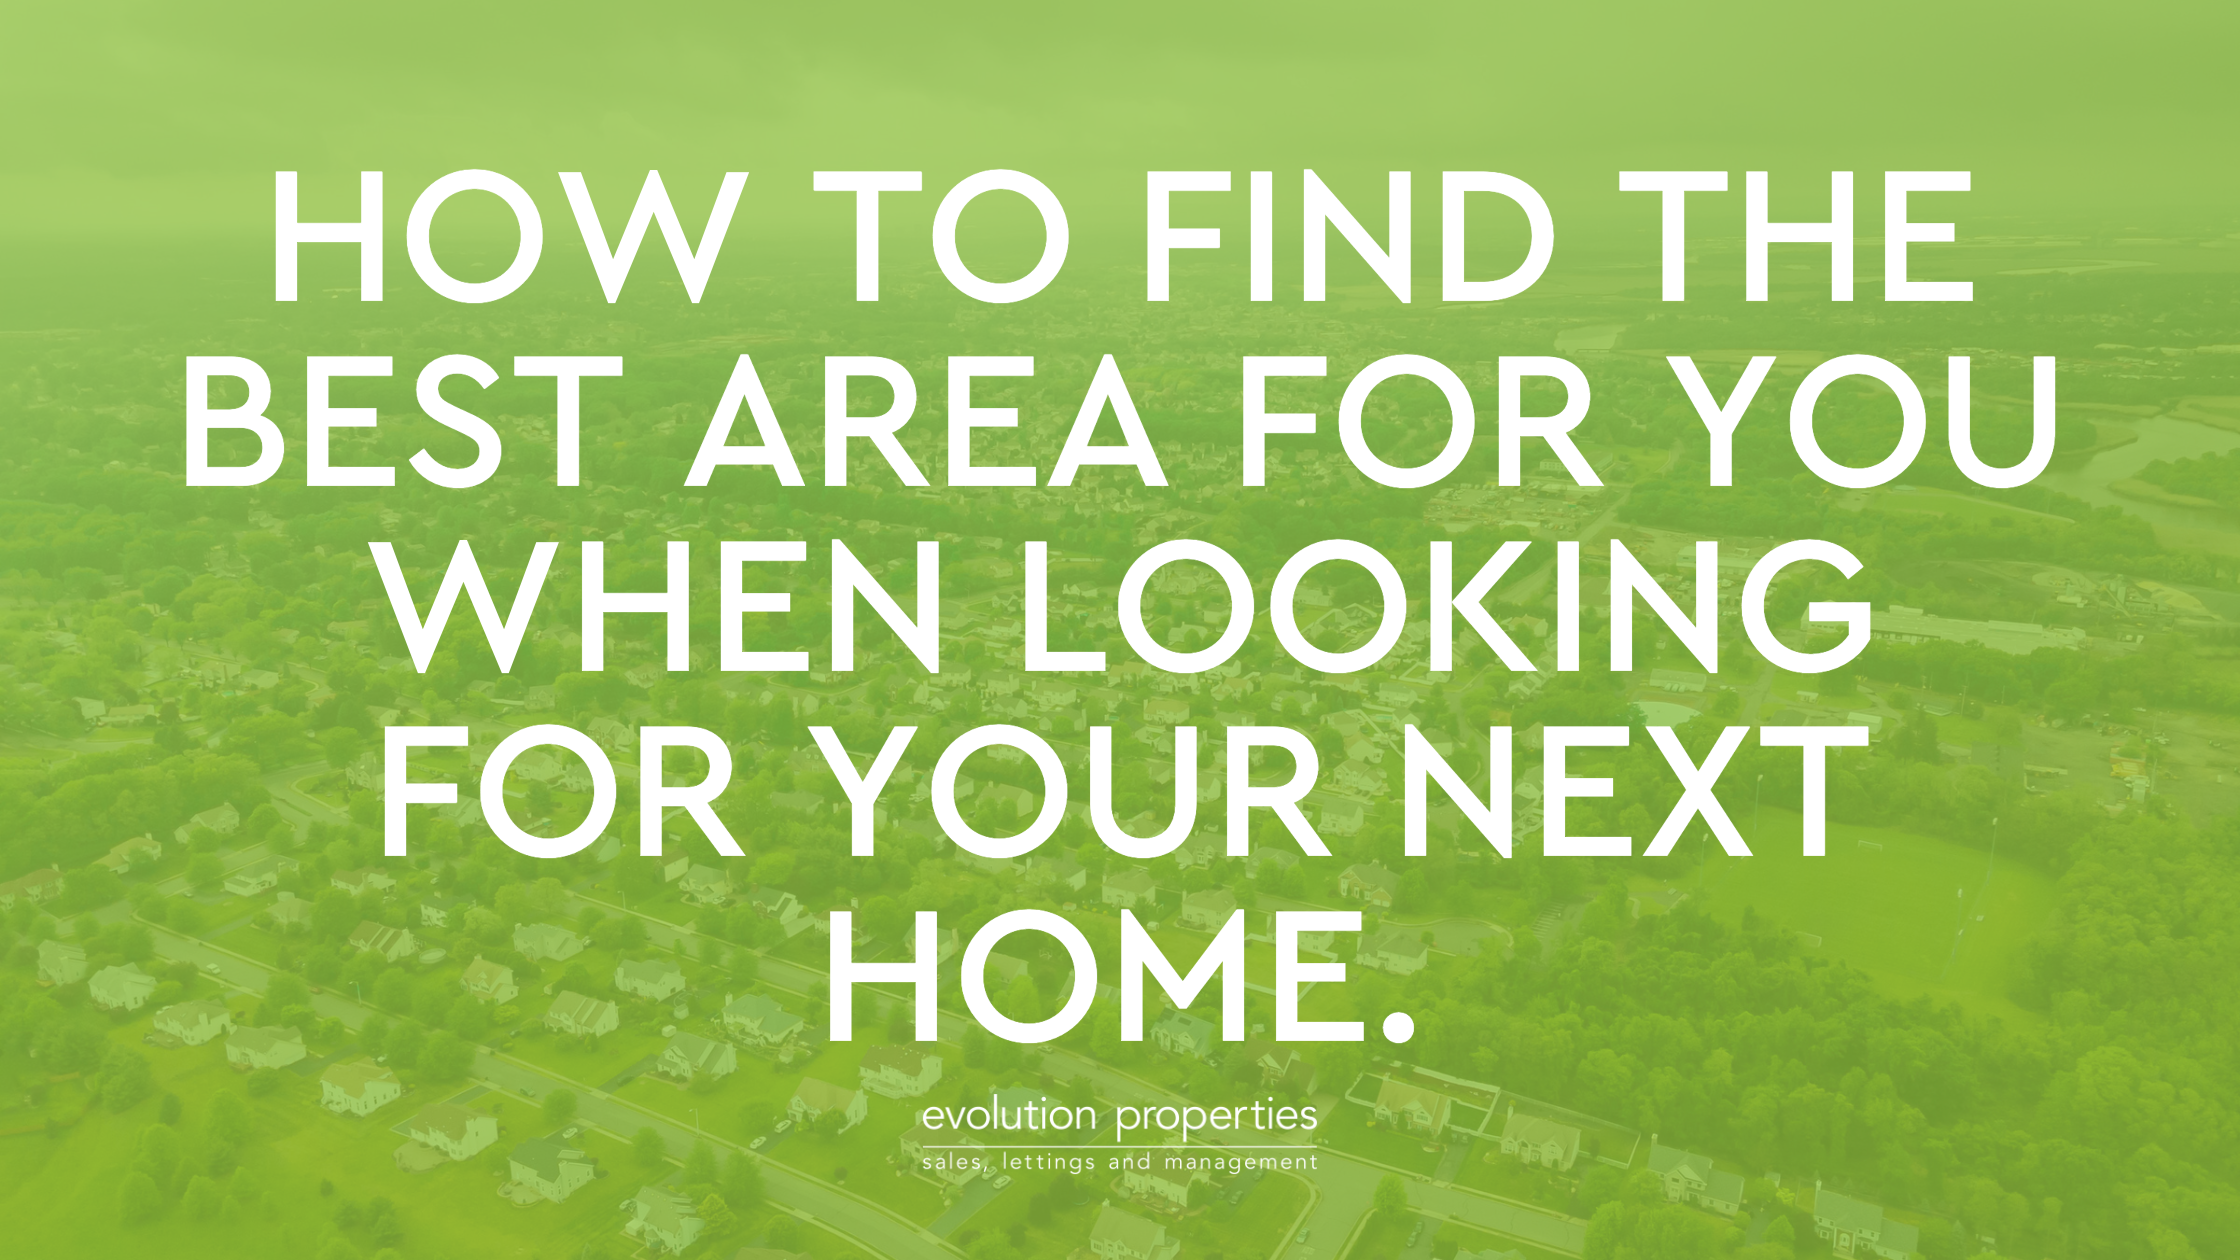 How to find the best area for you when looking for